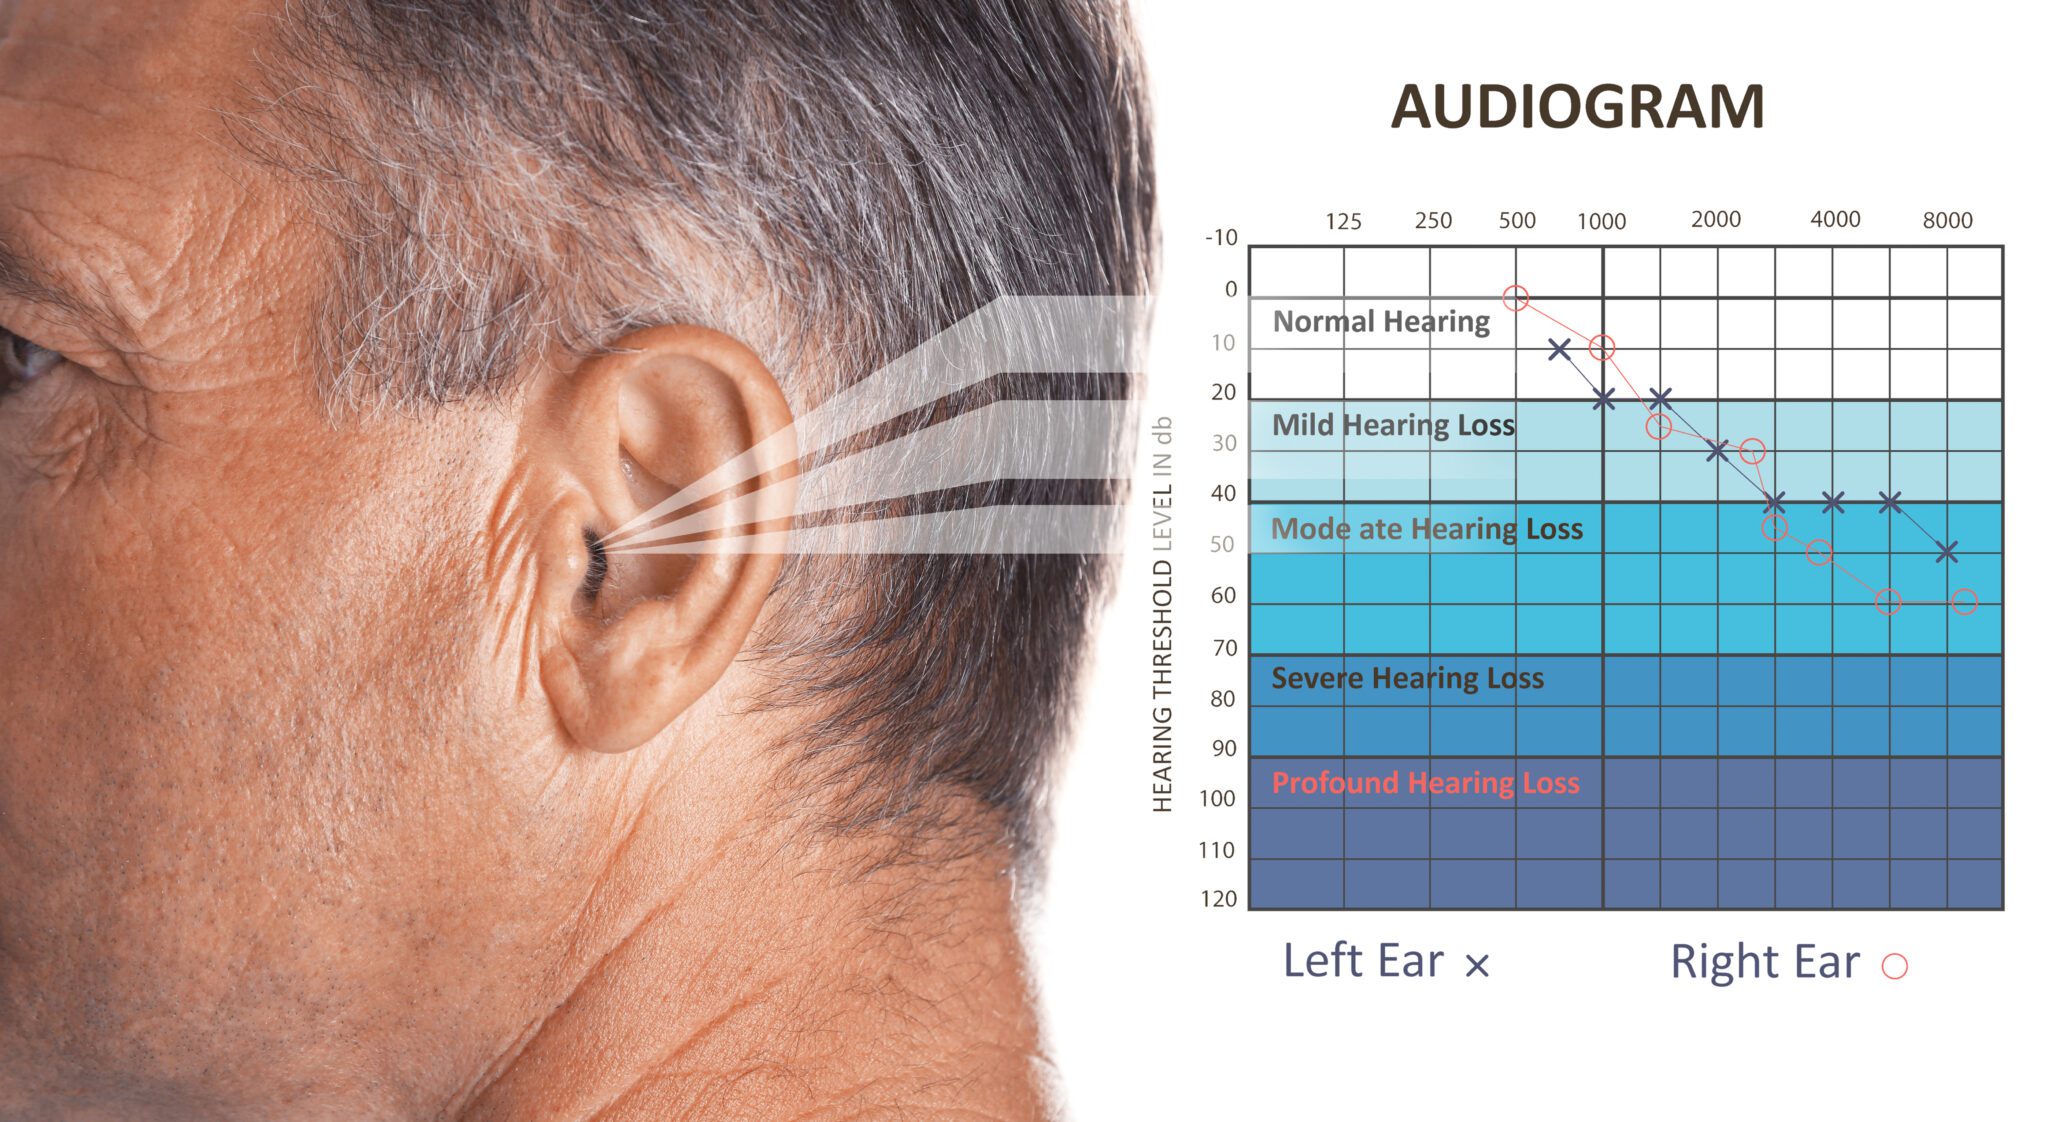 Can I Get a VA Rating for Hearing Loss and Tinnitus? Here's 3 Ways to